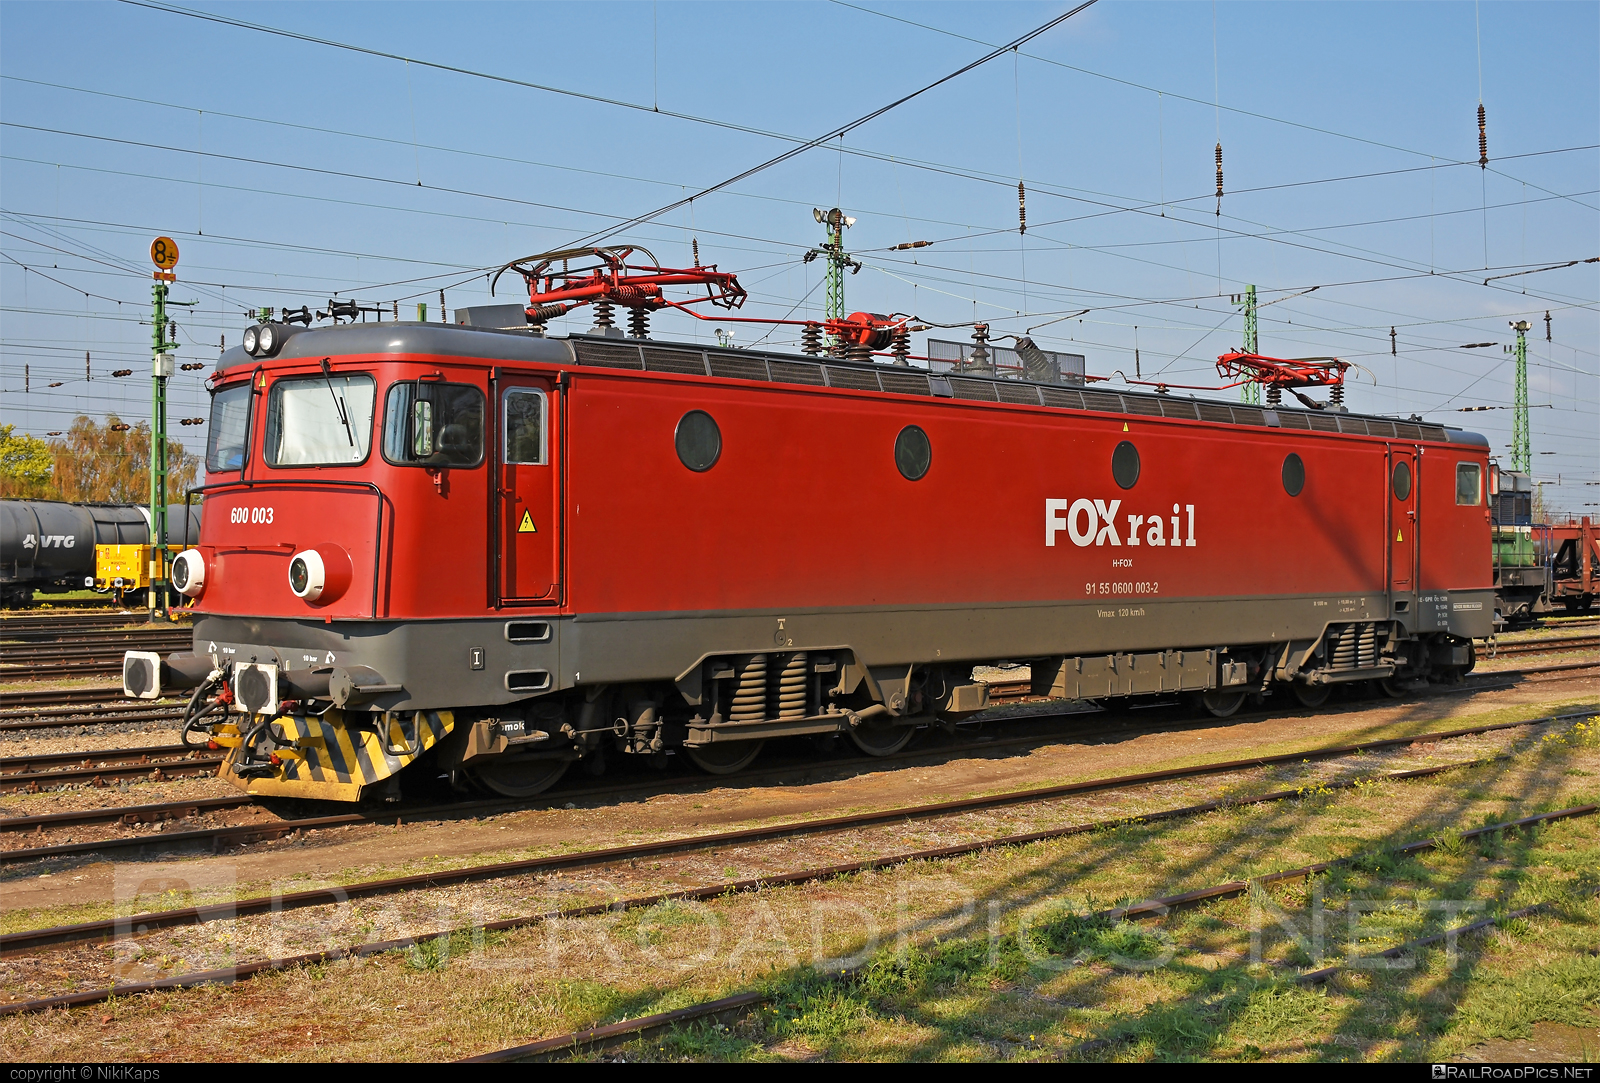 Electroputere LE 5100 - 600 003 operated by FOXrail Zrt. #electroputere #electroputerecraiova #electroputerele5100 #foxrail #le5100